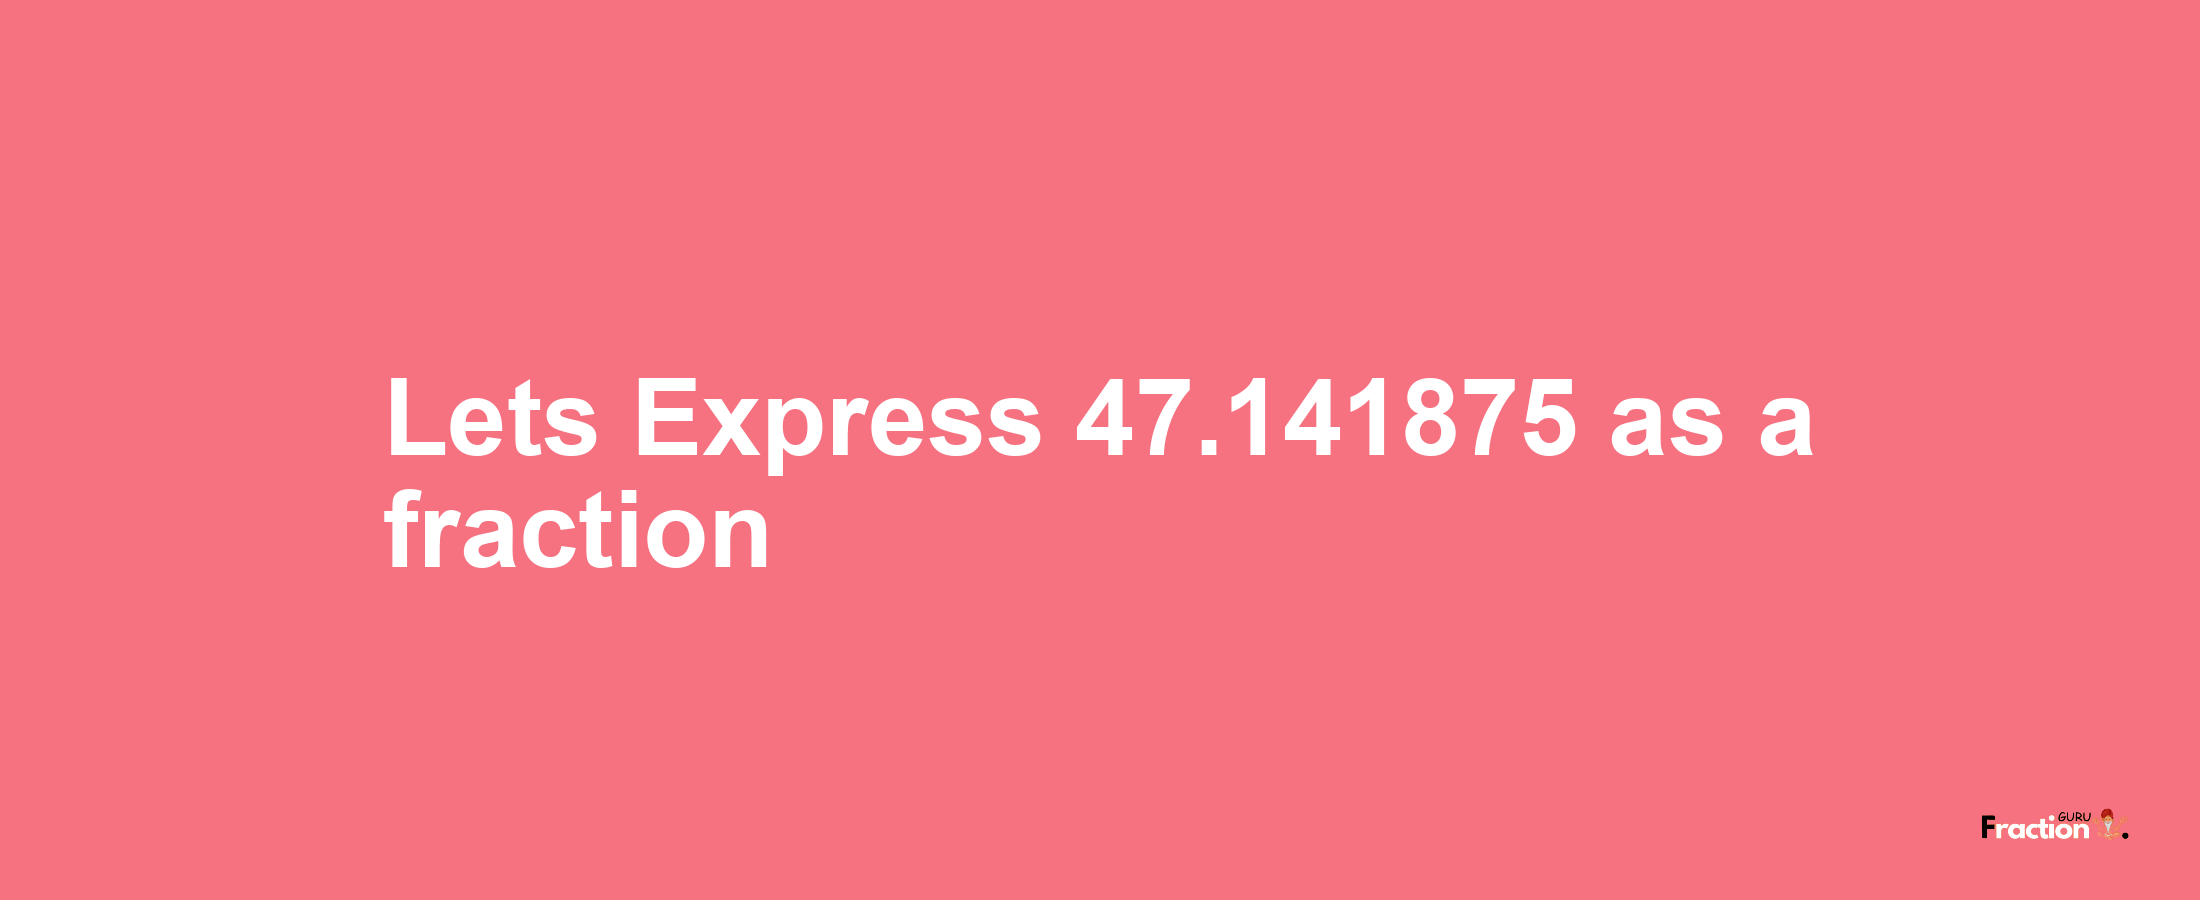 Lets Express 47.141875 as afraction